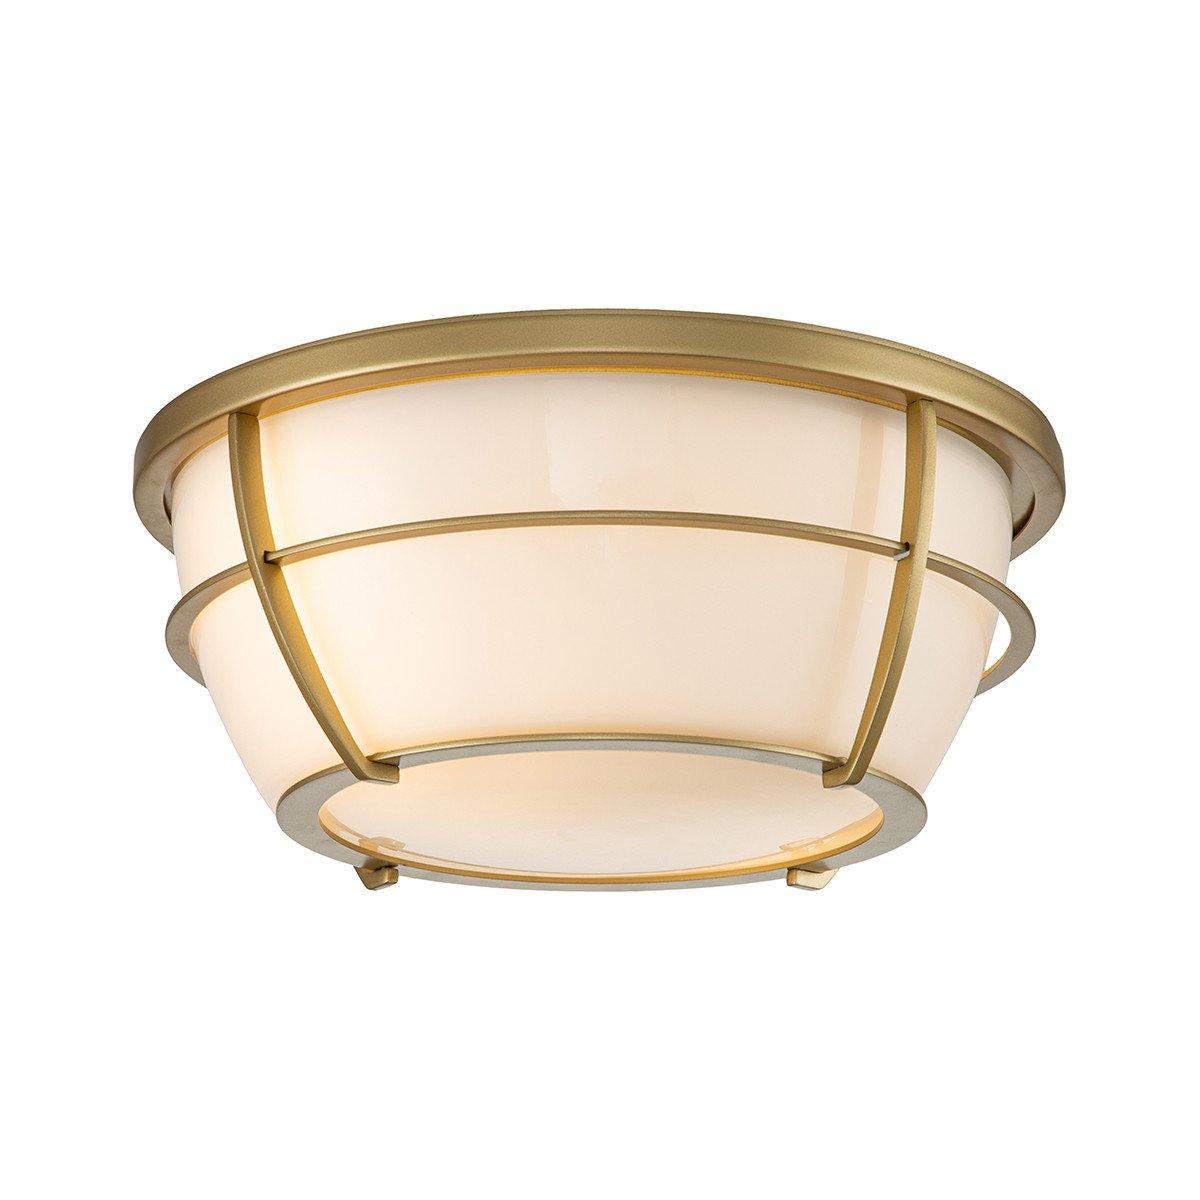 Quoizel Chance Bathroom Ceiling Light Painted Natural Brass IP44